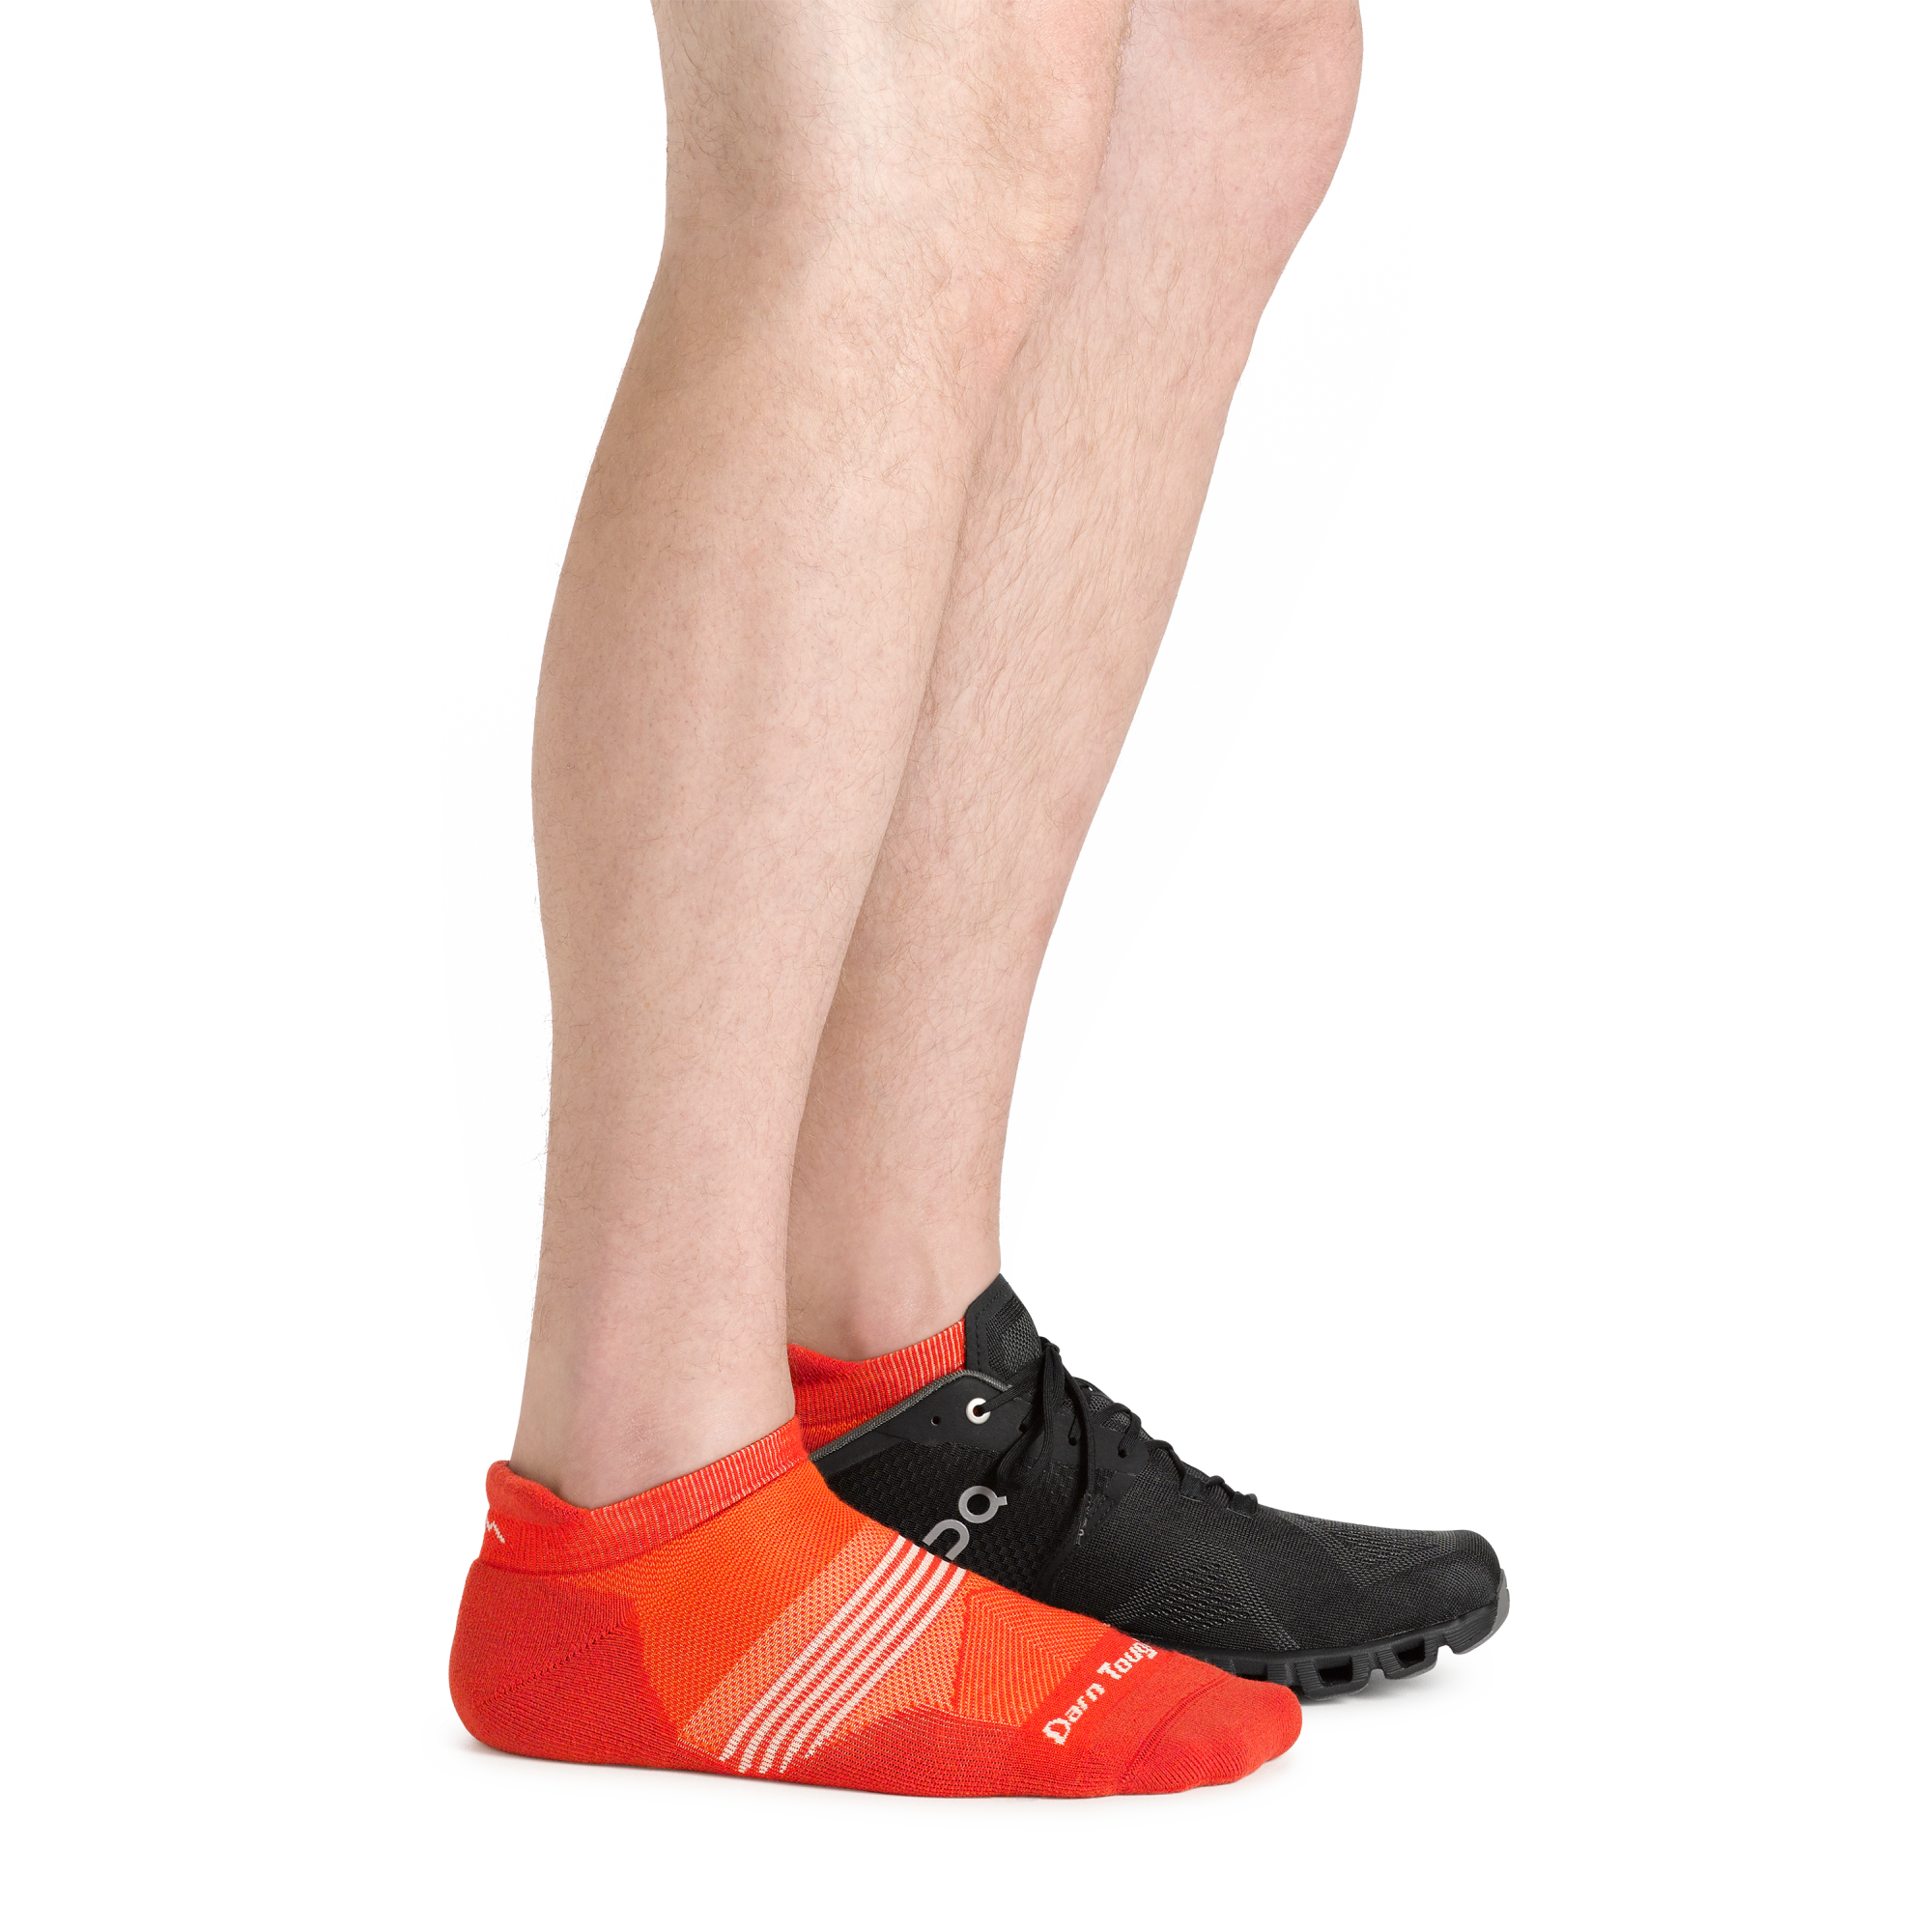 Side shot of model wearing the men's element no show tab running sock in tiger color with a black sneaker on his left foot